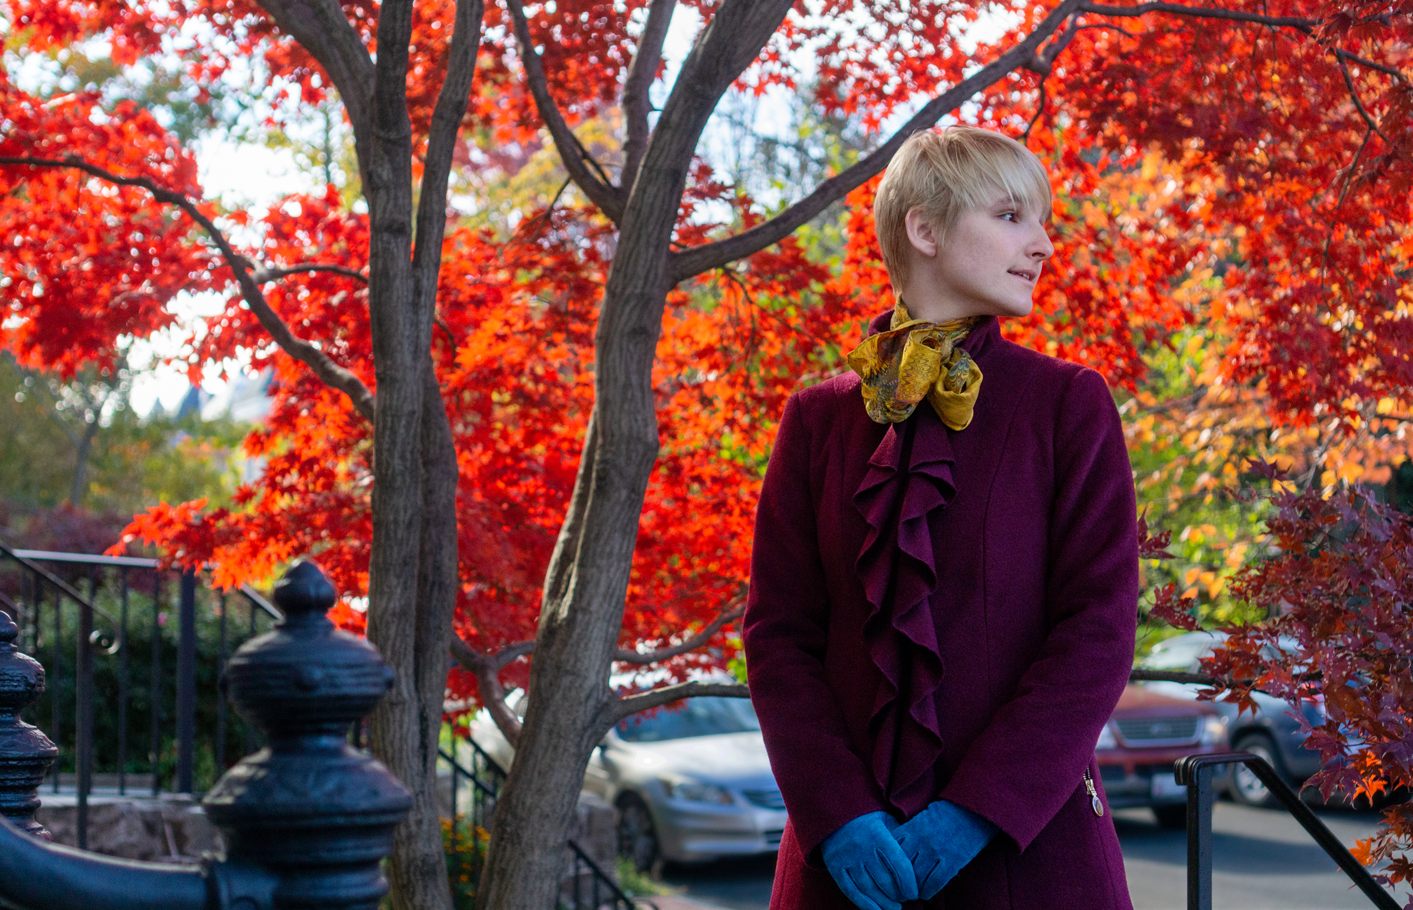 B stands amongst the vibrant red and orange foliage of fall in DC. They wear a maroon coat and blue gloves.